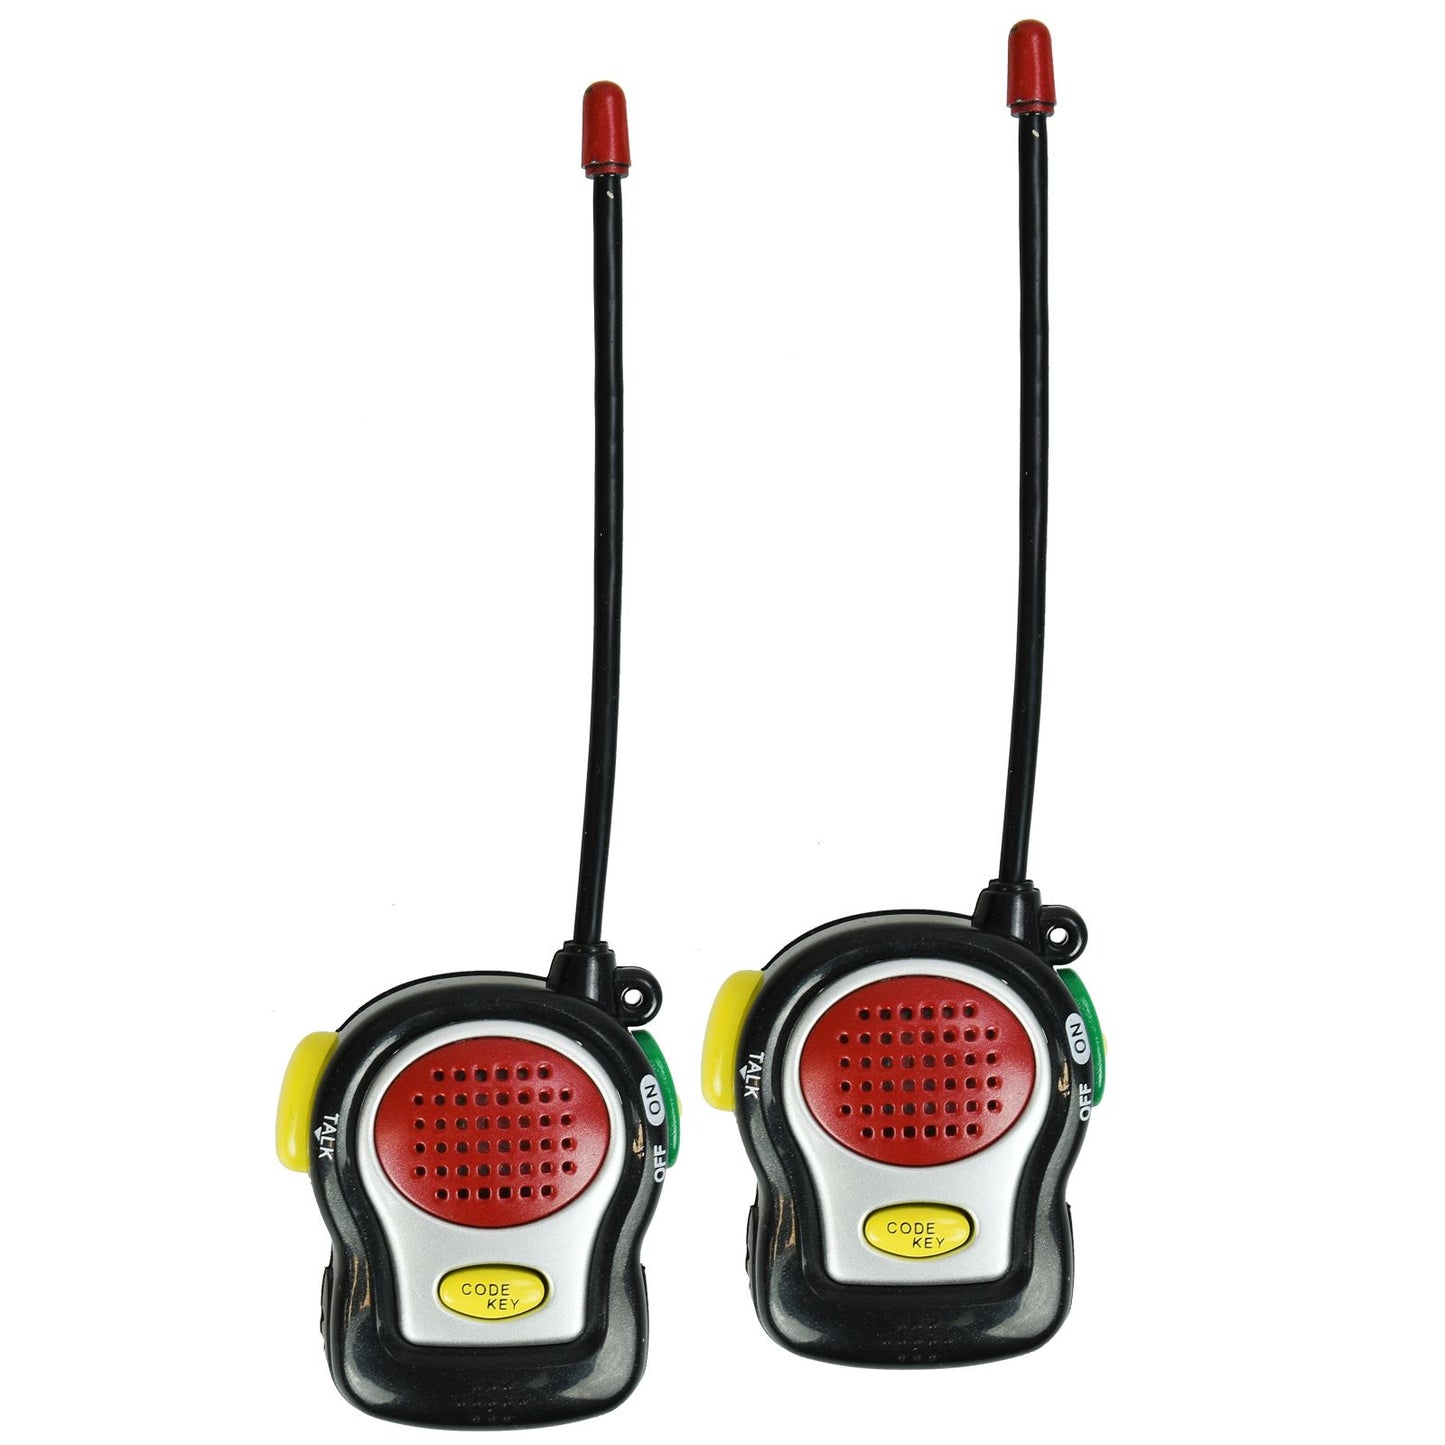 Miniature Walkie Talkies Toy Electronic Gadgets For Communication